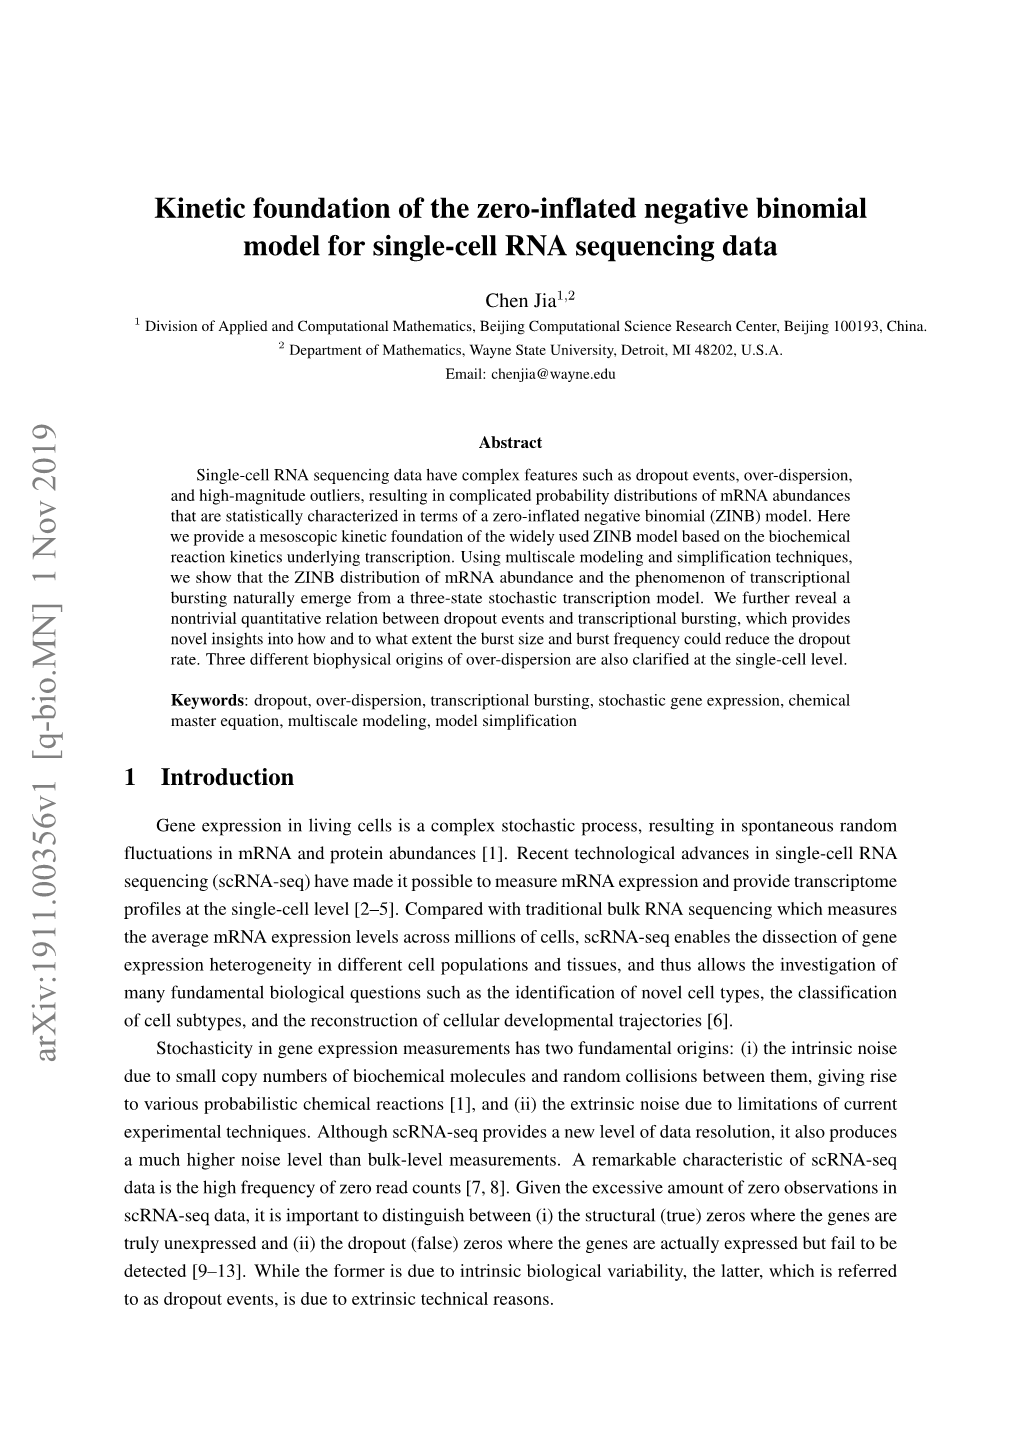 Kinetic Foundation of the Zero-Inflated Negative Binomial Model for Single-Cell RNA Sequencing Data